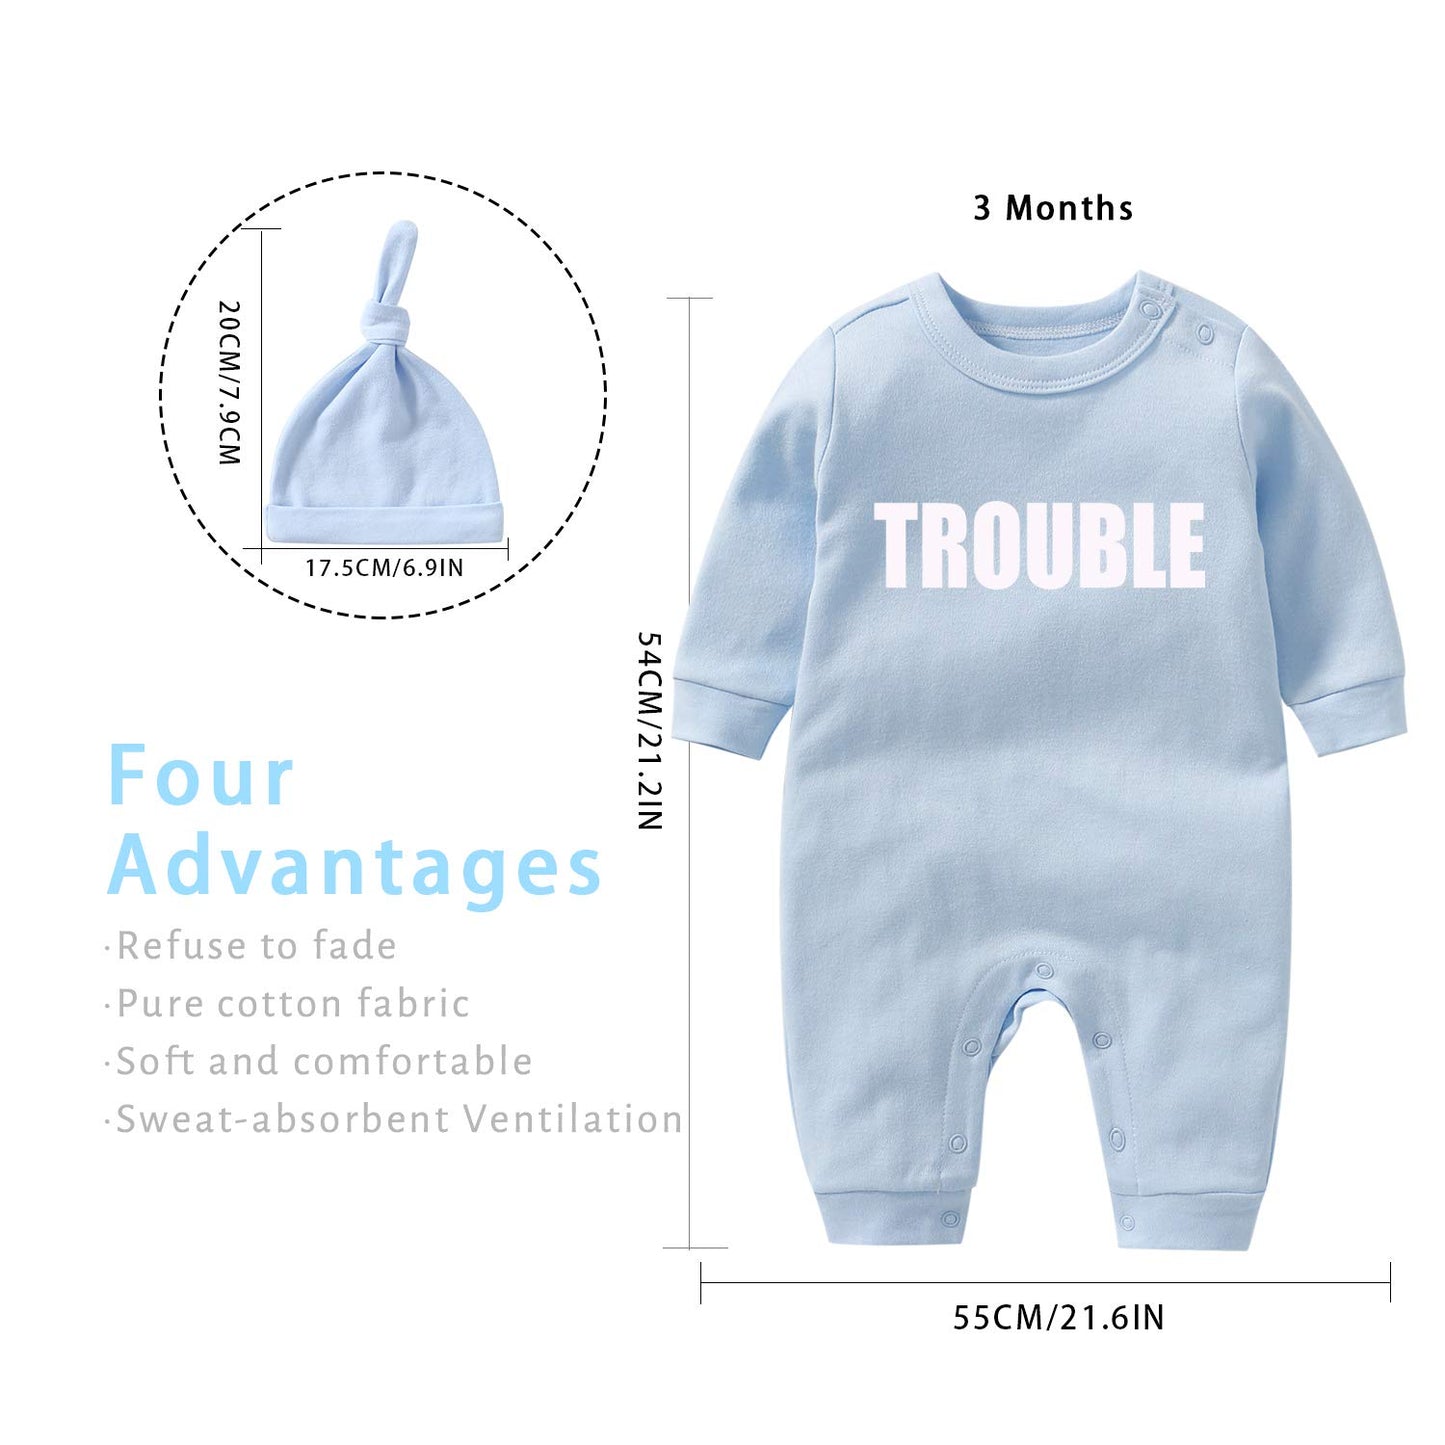 YSCULBUTOL Baby Twins Bodysuits Funny Double Trouble Cute Romper Twin Jumpsuits Hat Set 3-6 Months